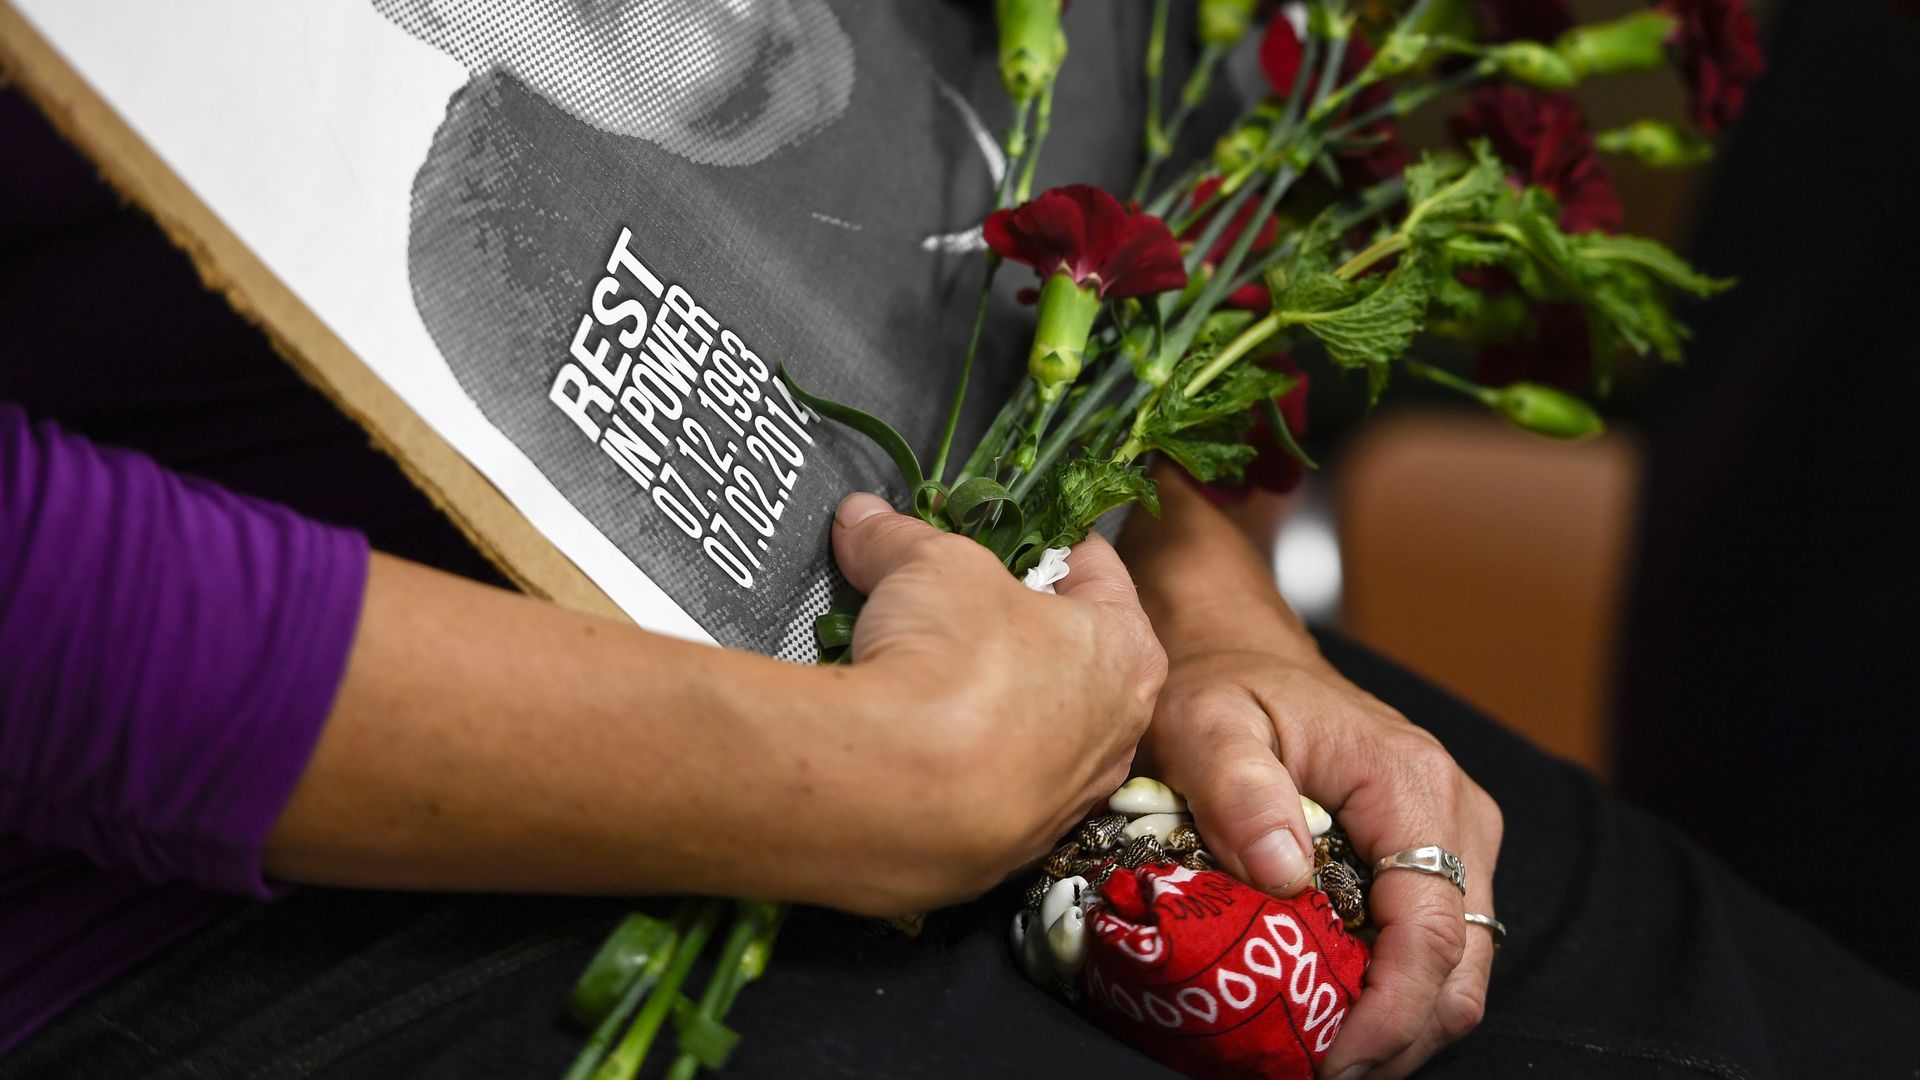 A picture of arms holding flowers and a picture of a young man killed by police